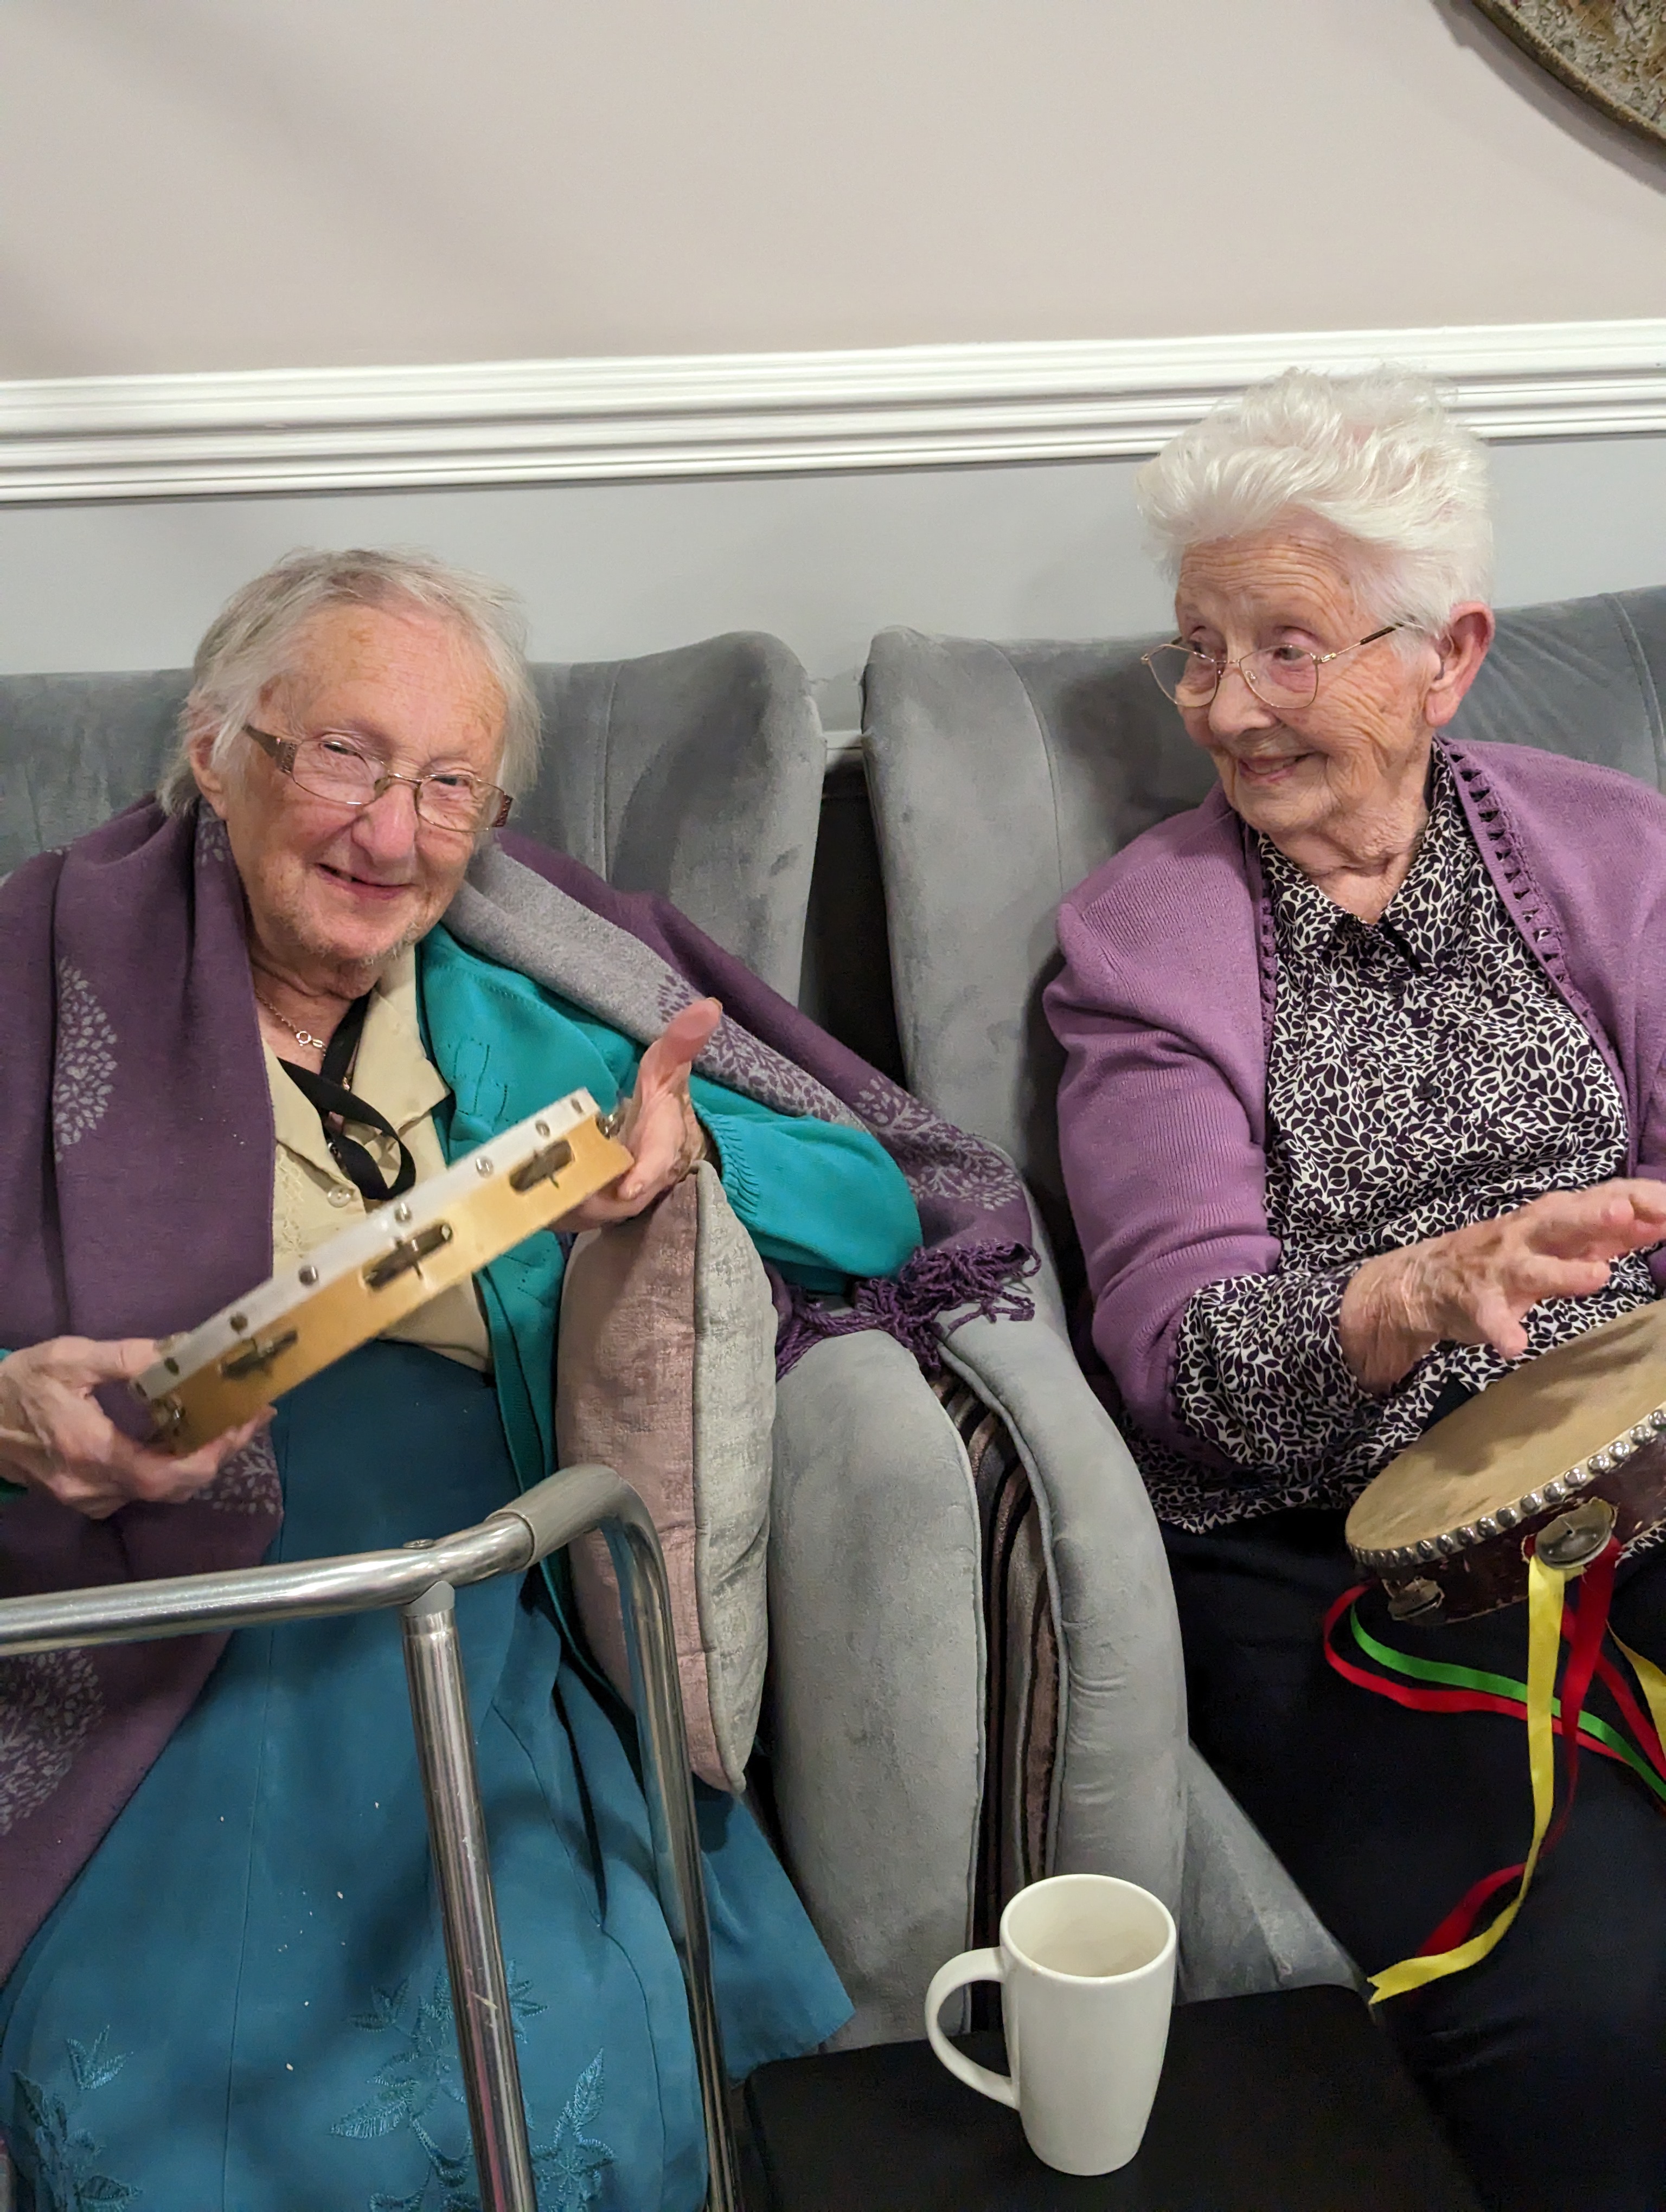 Residents enjoying joining in with The Woodwind of Stortford